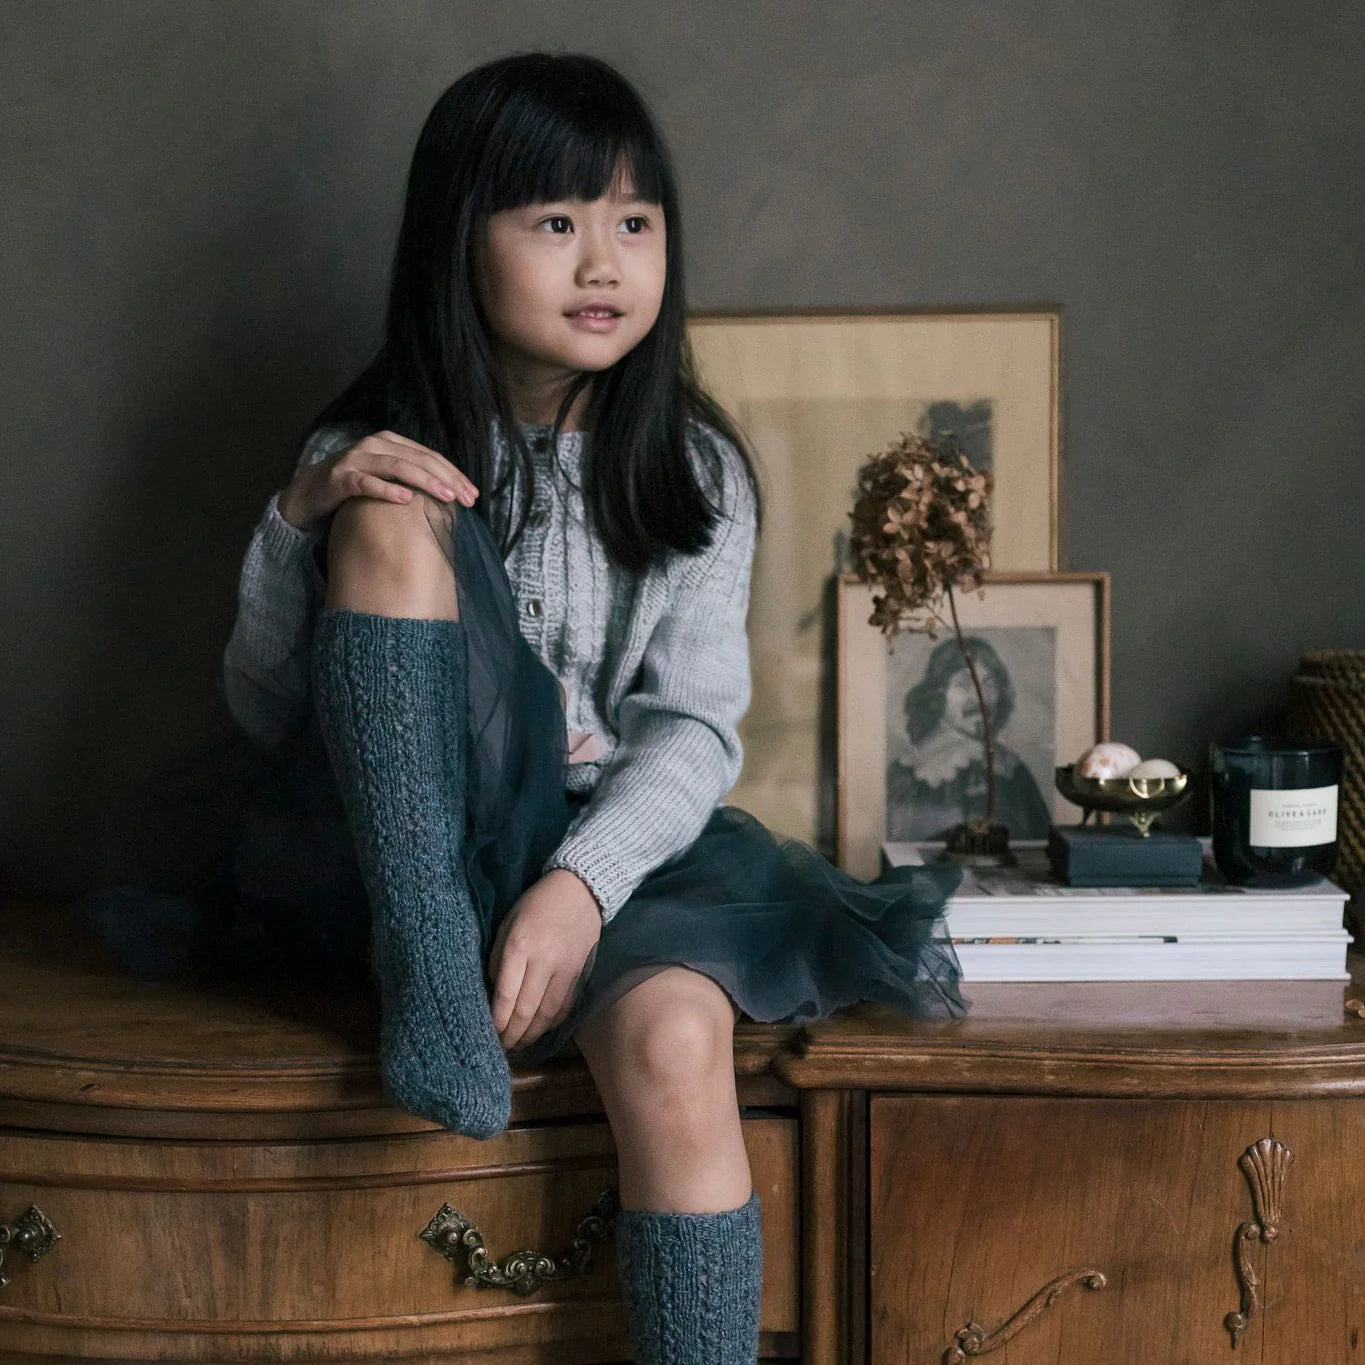 Making Memories - Timeless Knits for Children by Claudia Quintanilla